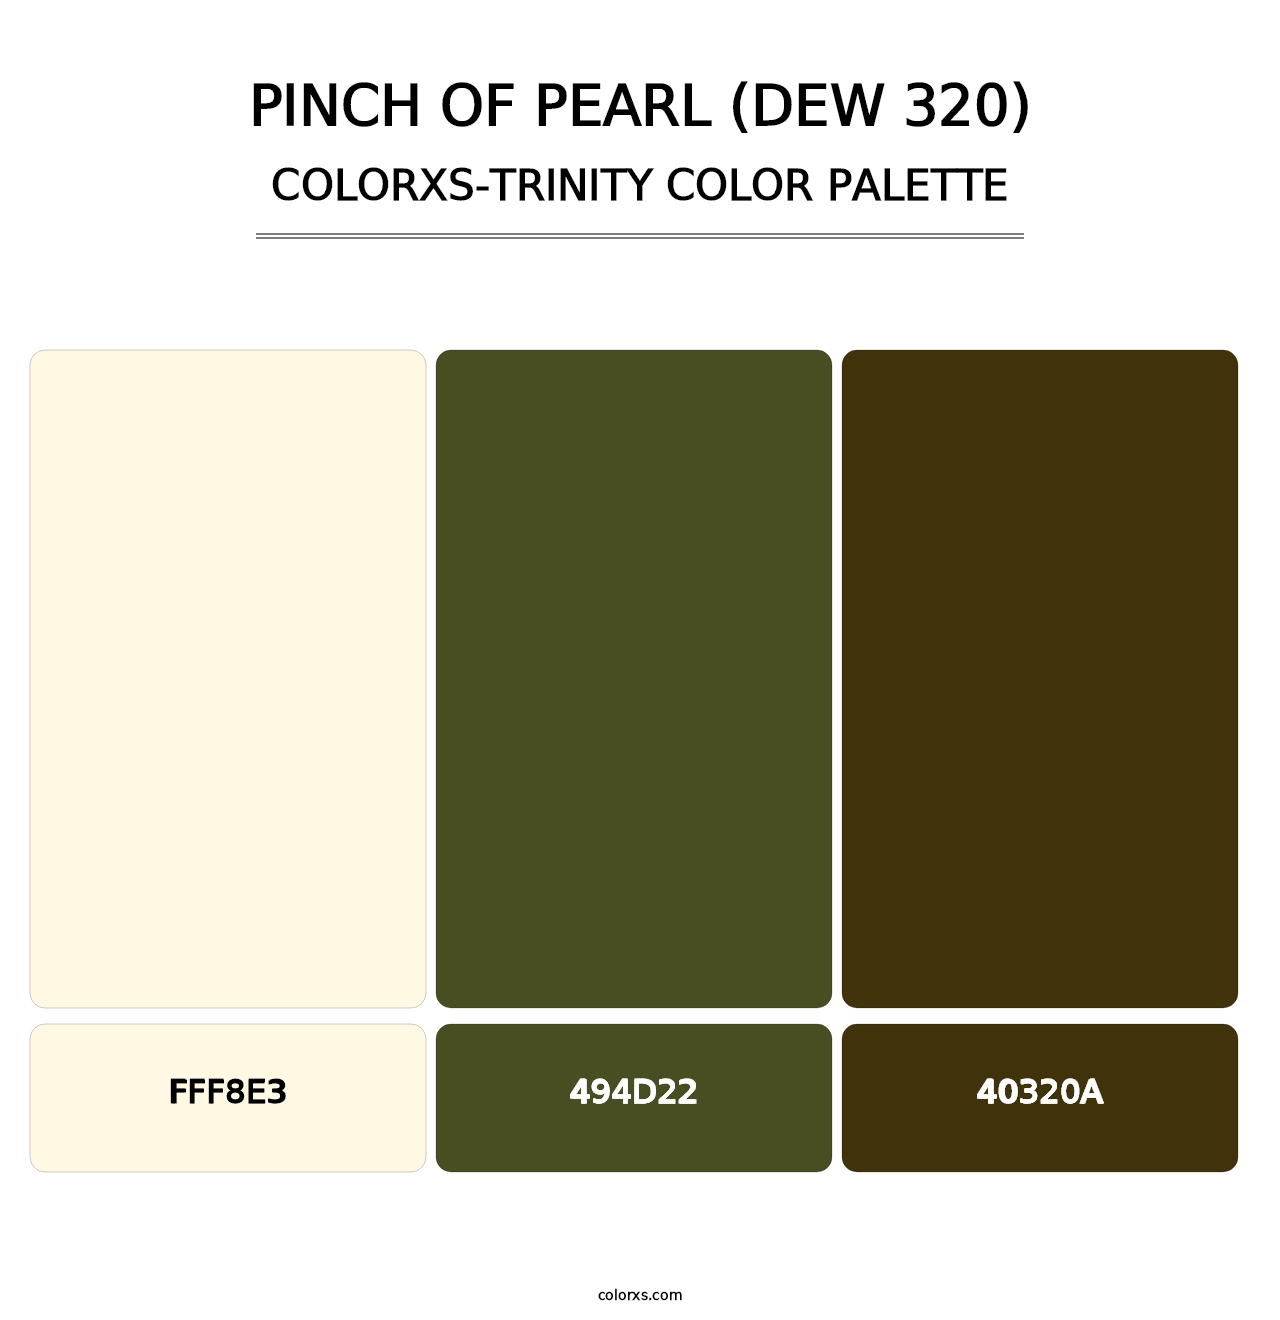 Pinch of Pearl (DEW 320) - Colorxs Trinity Palette